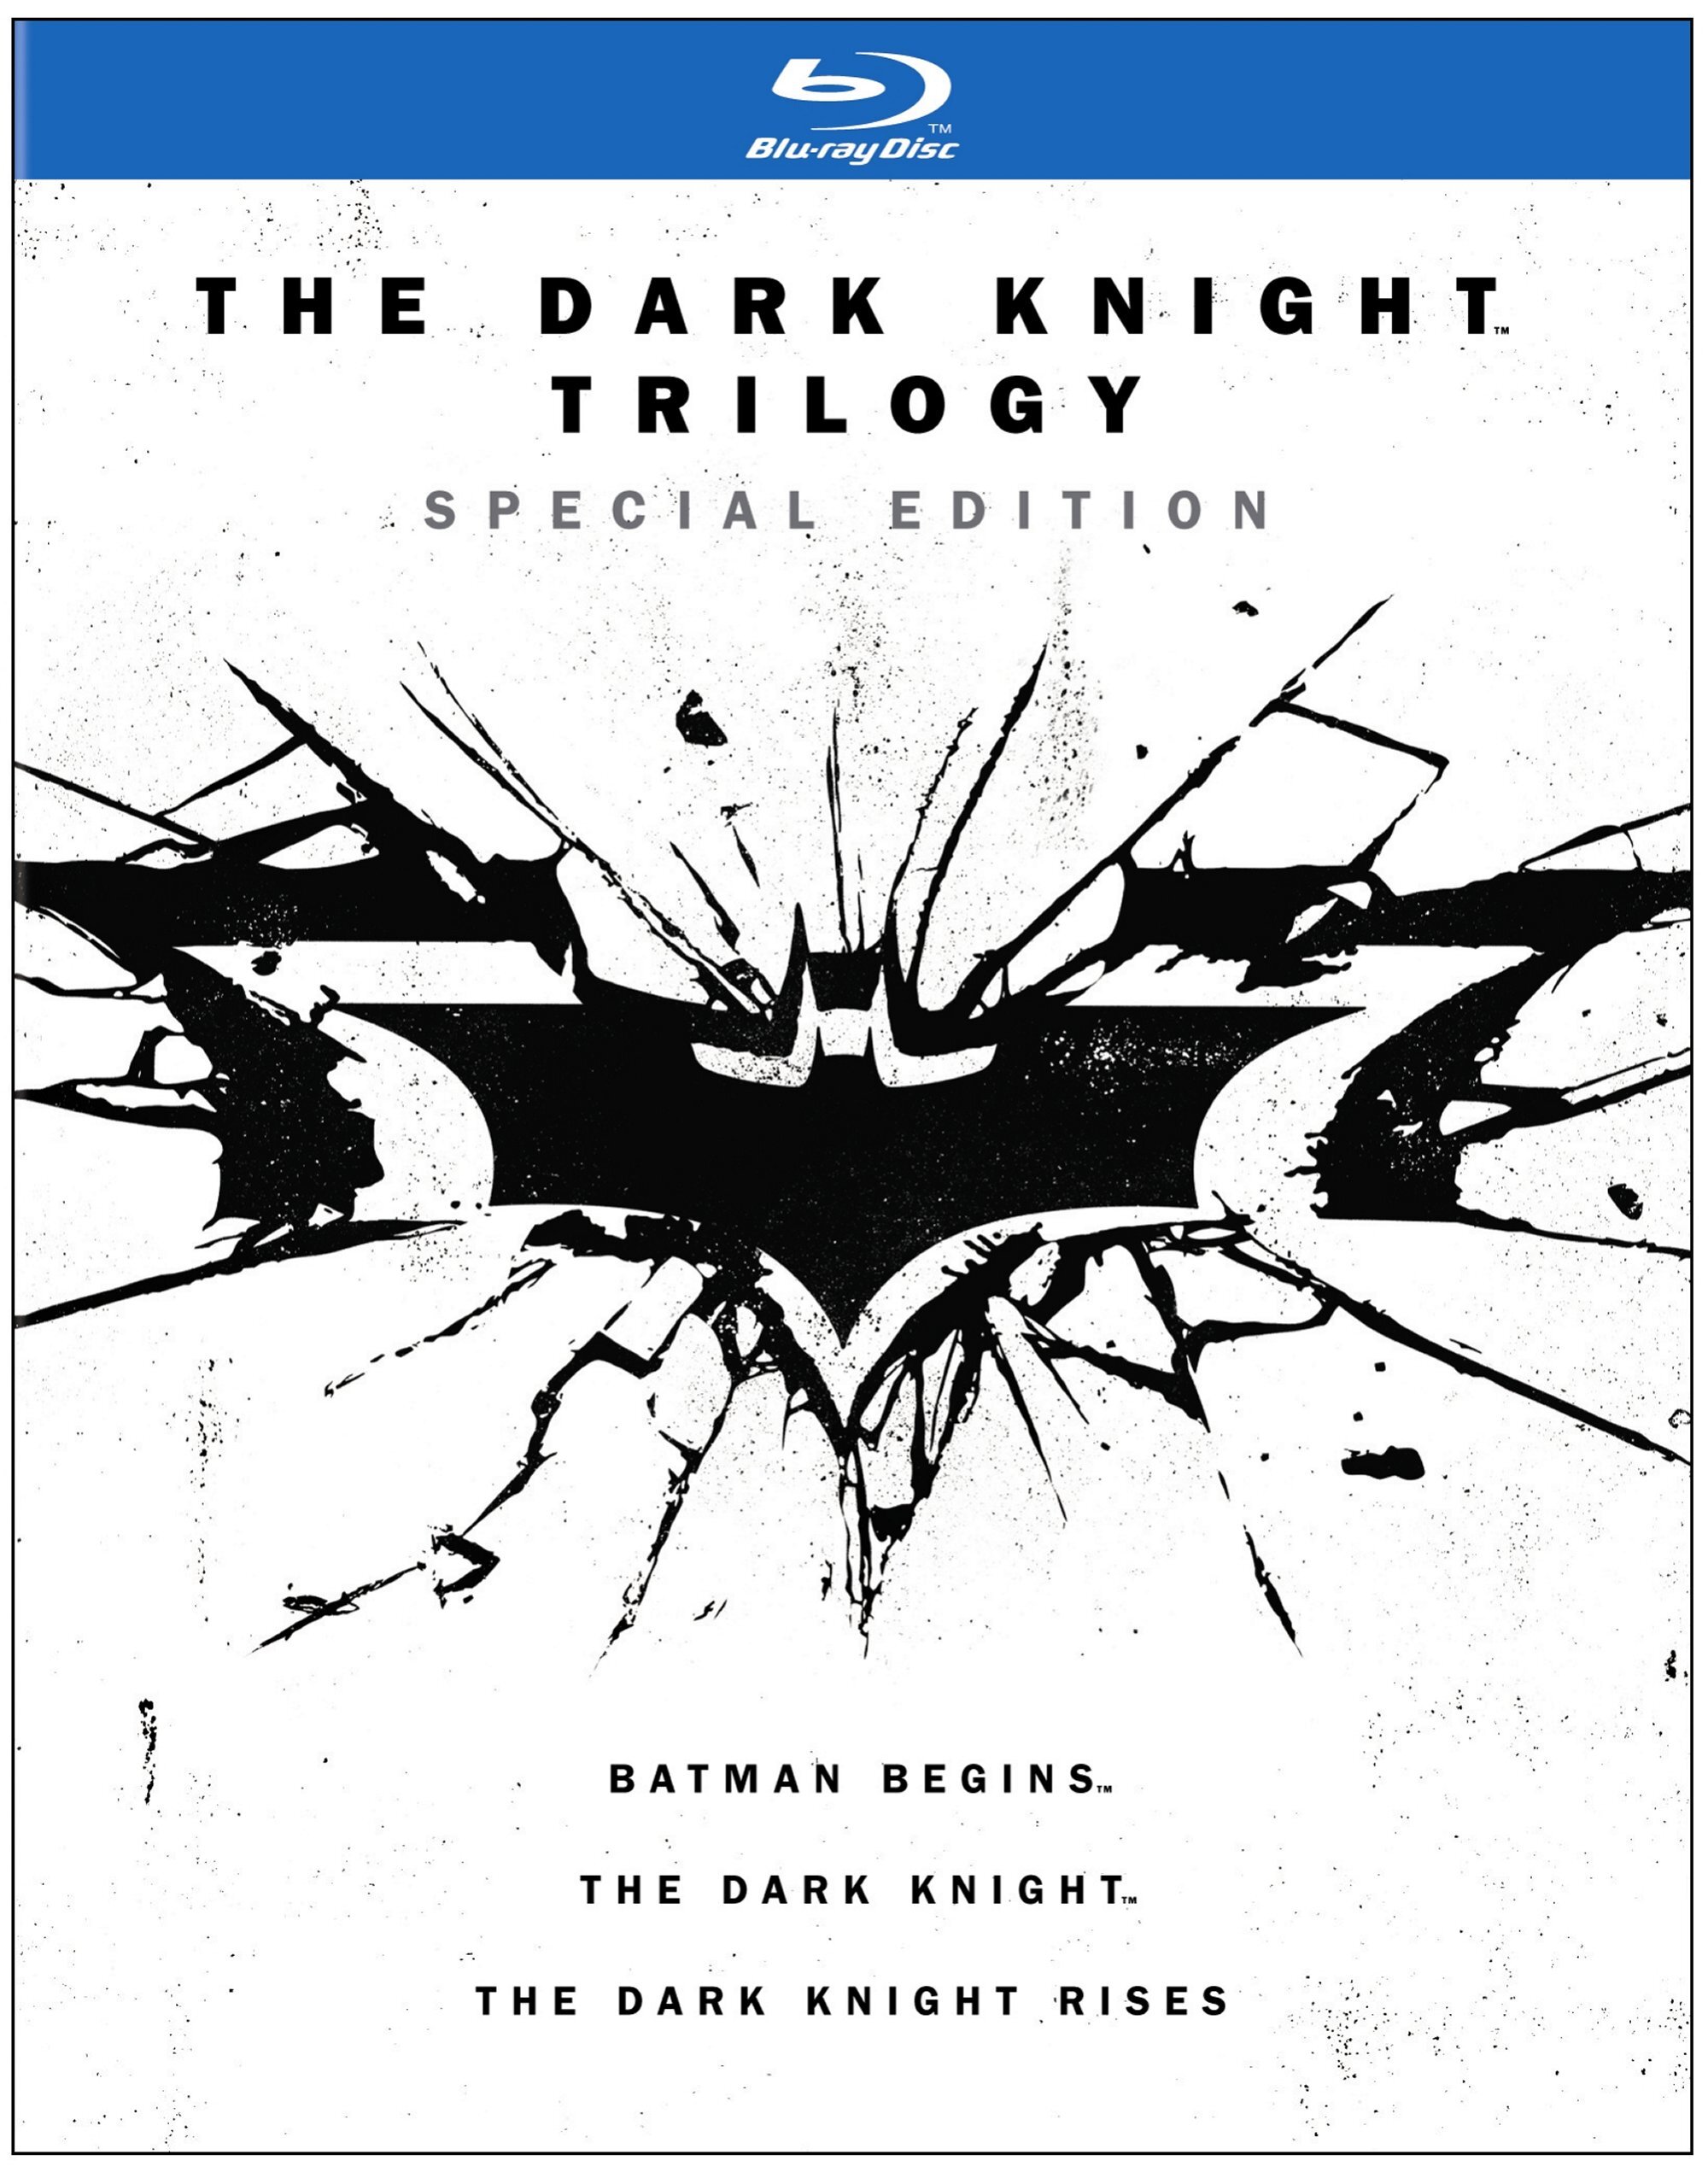 The Dark Knight Trilogy (Special Edition Box Set) - Blu-ray [ 2012 ]  - Action Movies On Blu-ray - Movies On GRUV